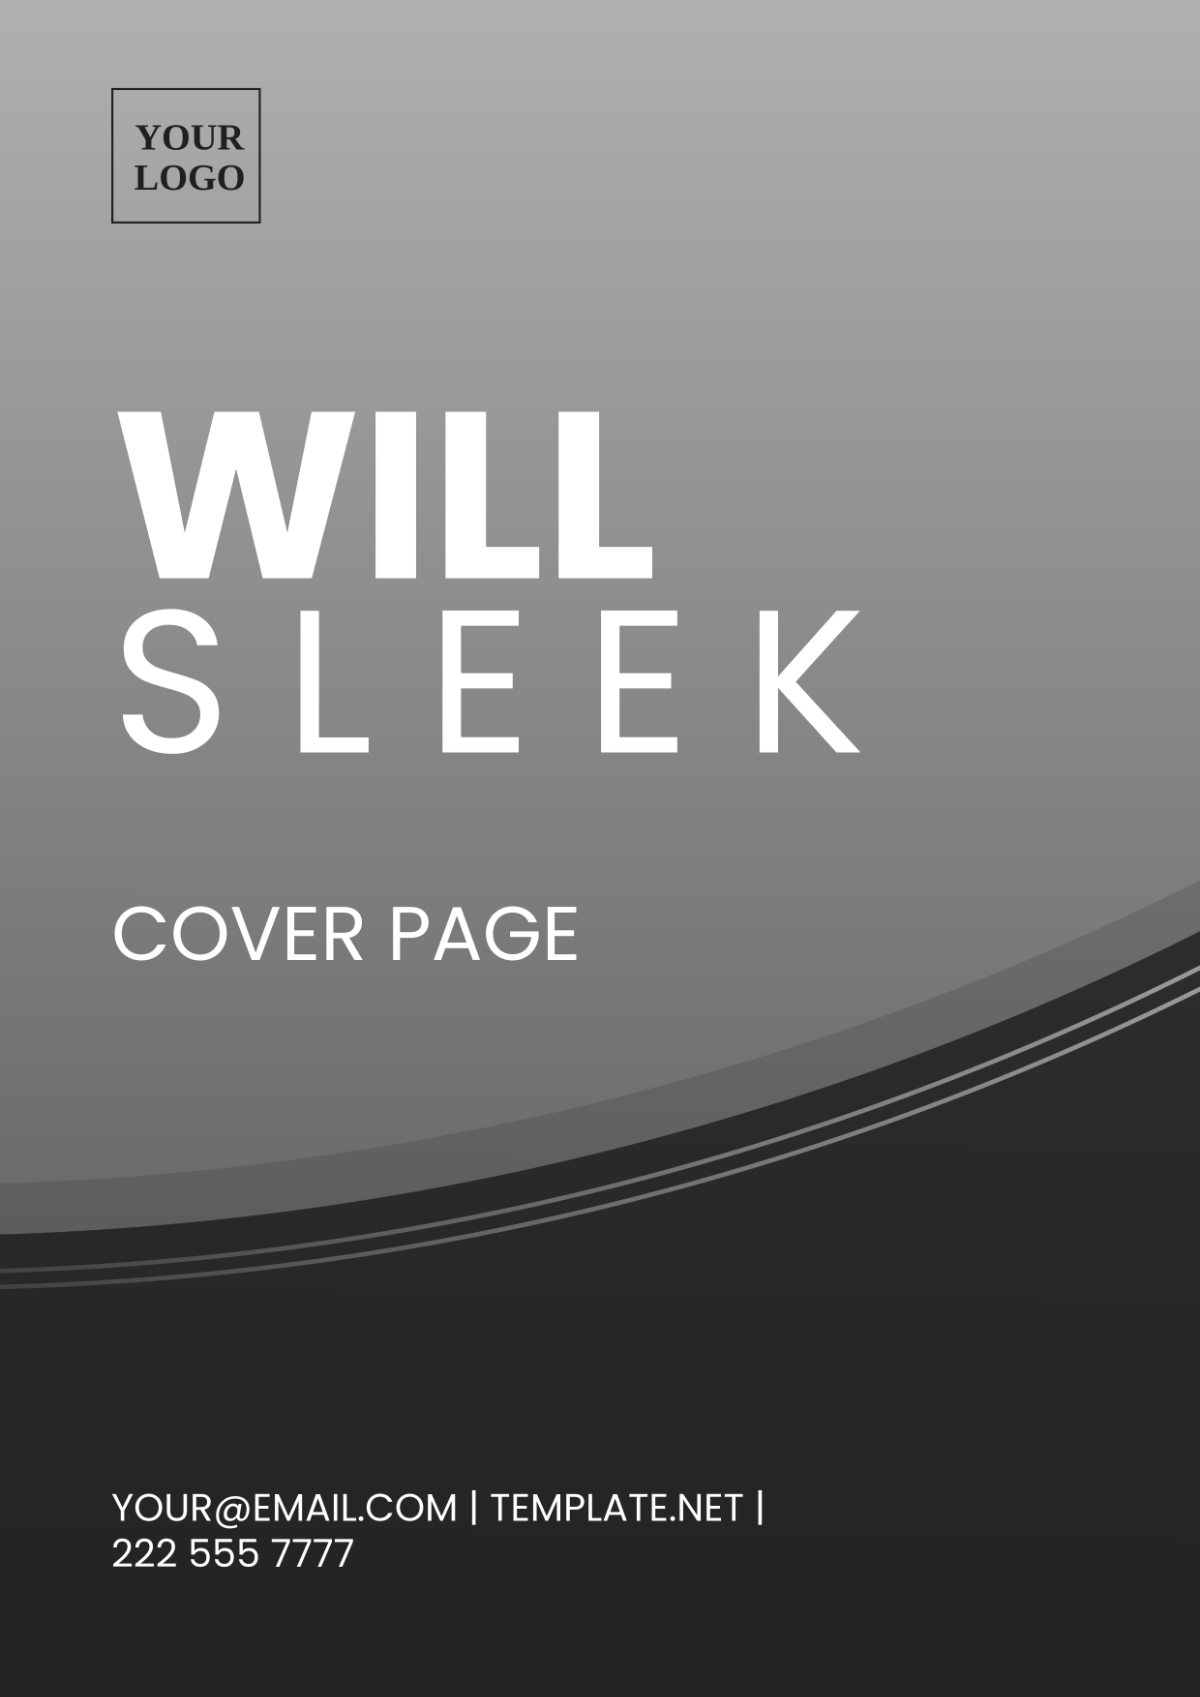 Will Sleek Cover Page Template